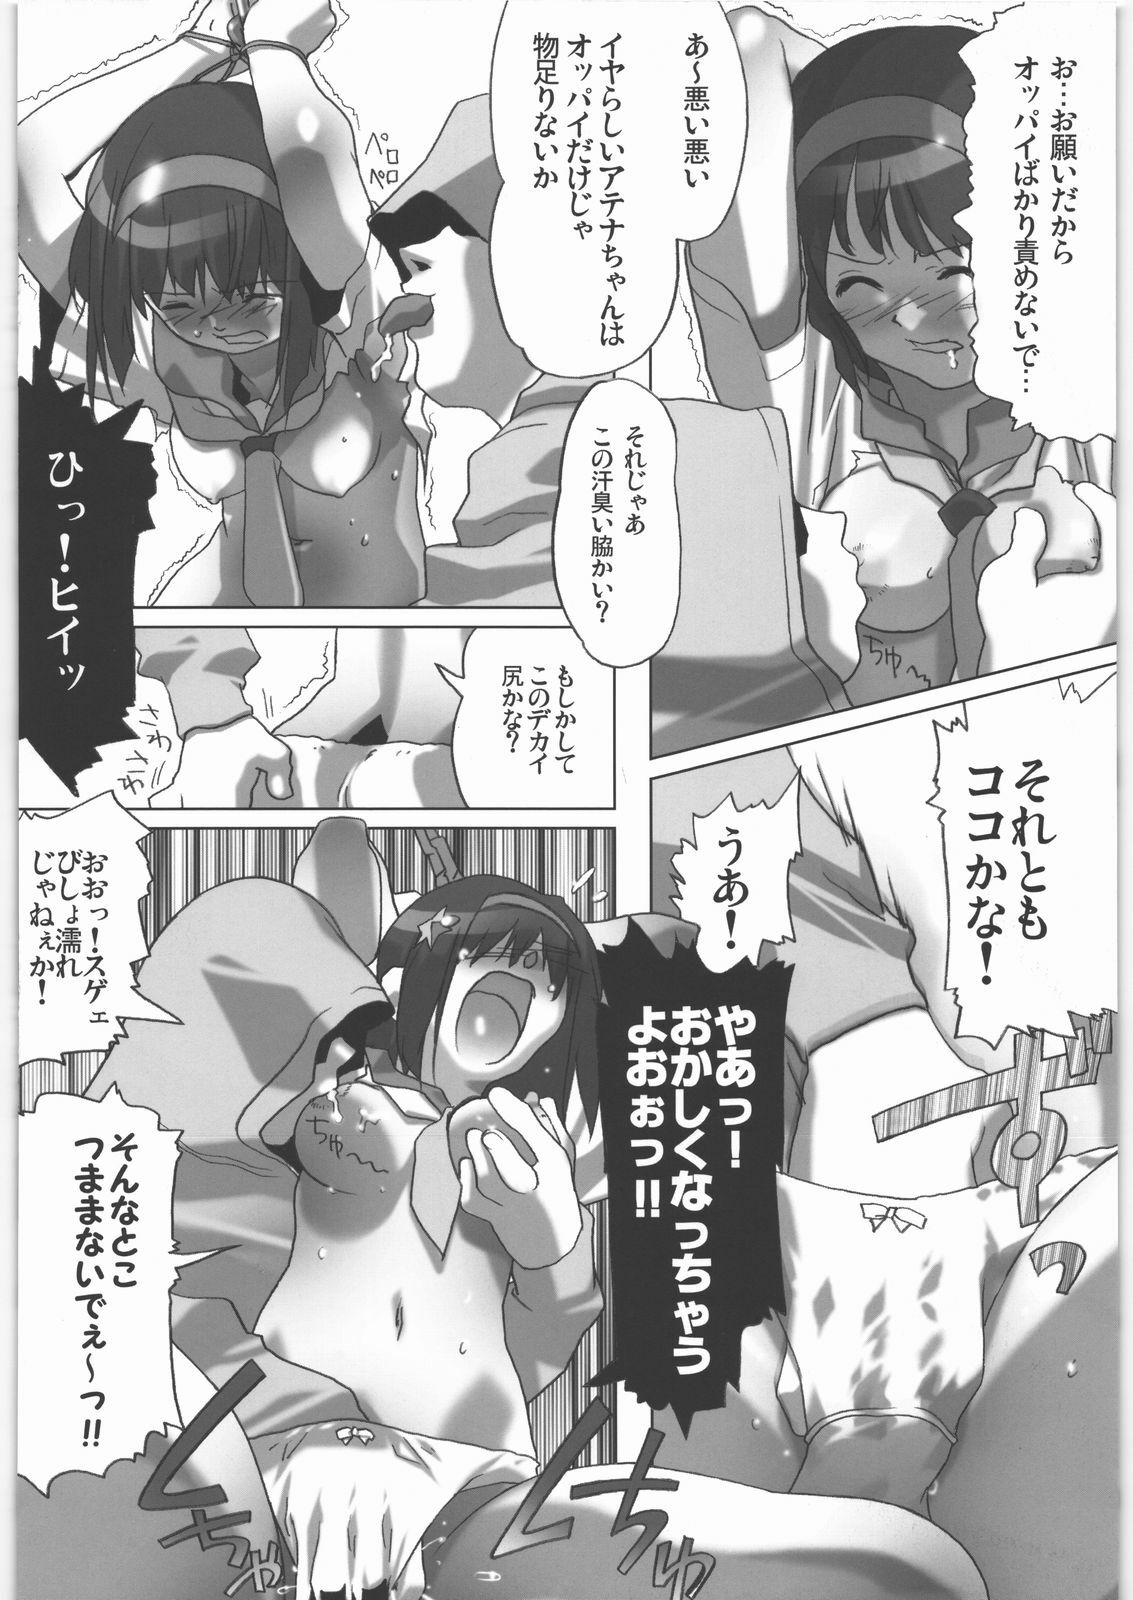 [Kacchuu Musume (Various)] COFFIN MAKER -PHYCHO SOLDIER- (King of Fighter) page 51 full